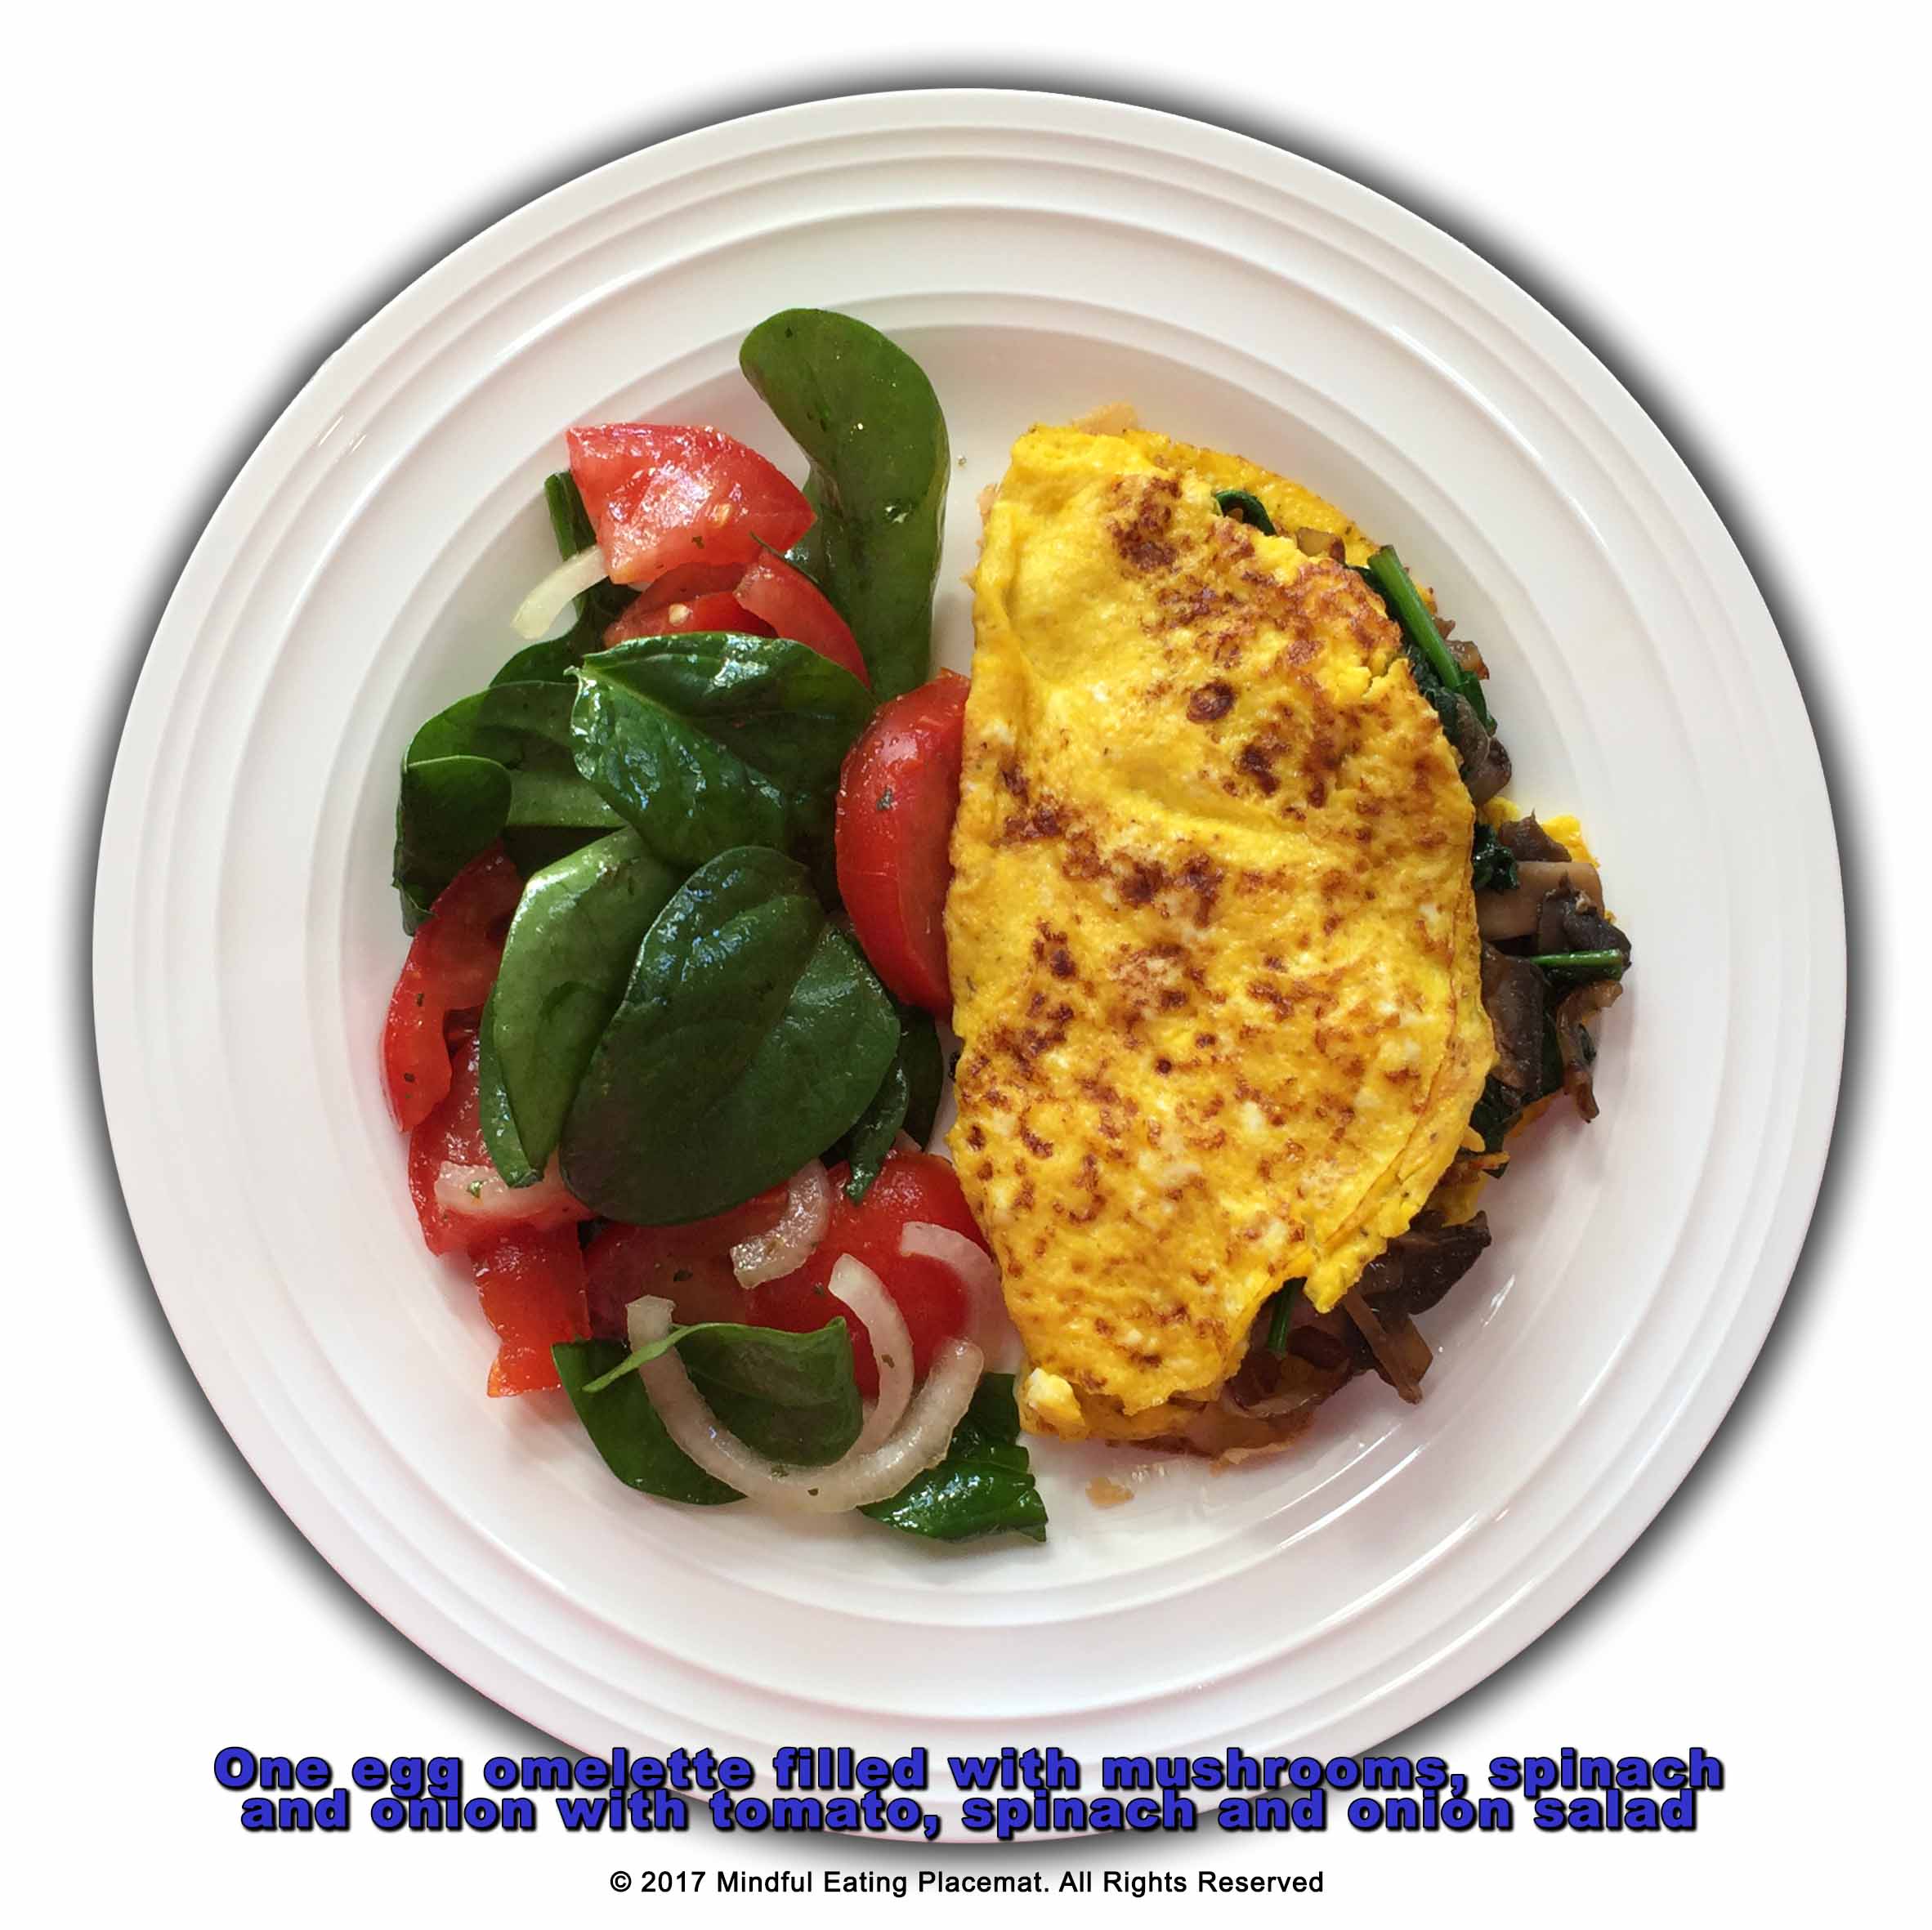 One egg omlette filled with mushrooms, spinach and onion with a tomato, spinach and olive salad